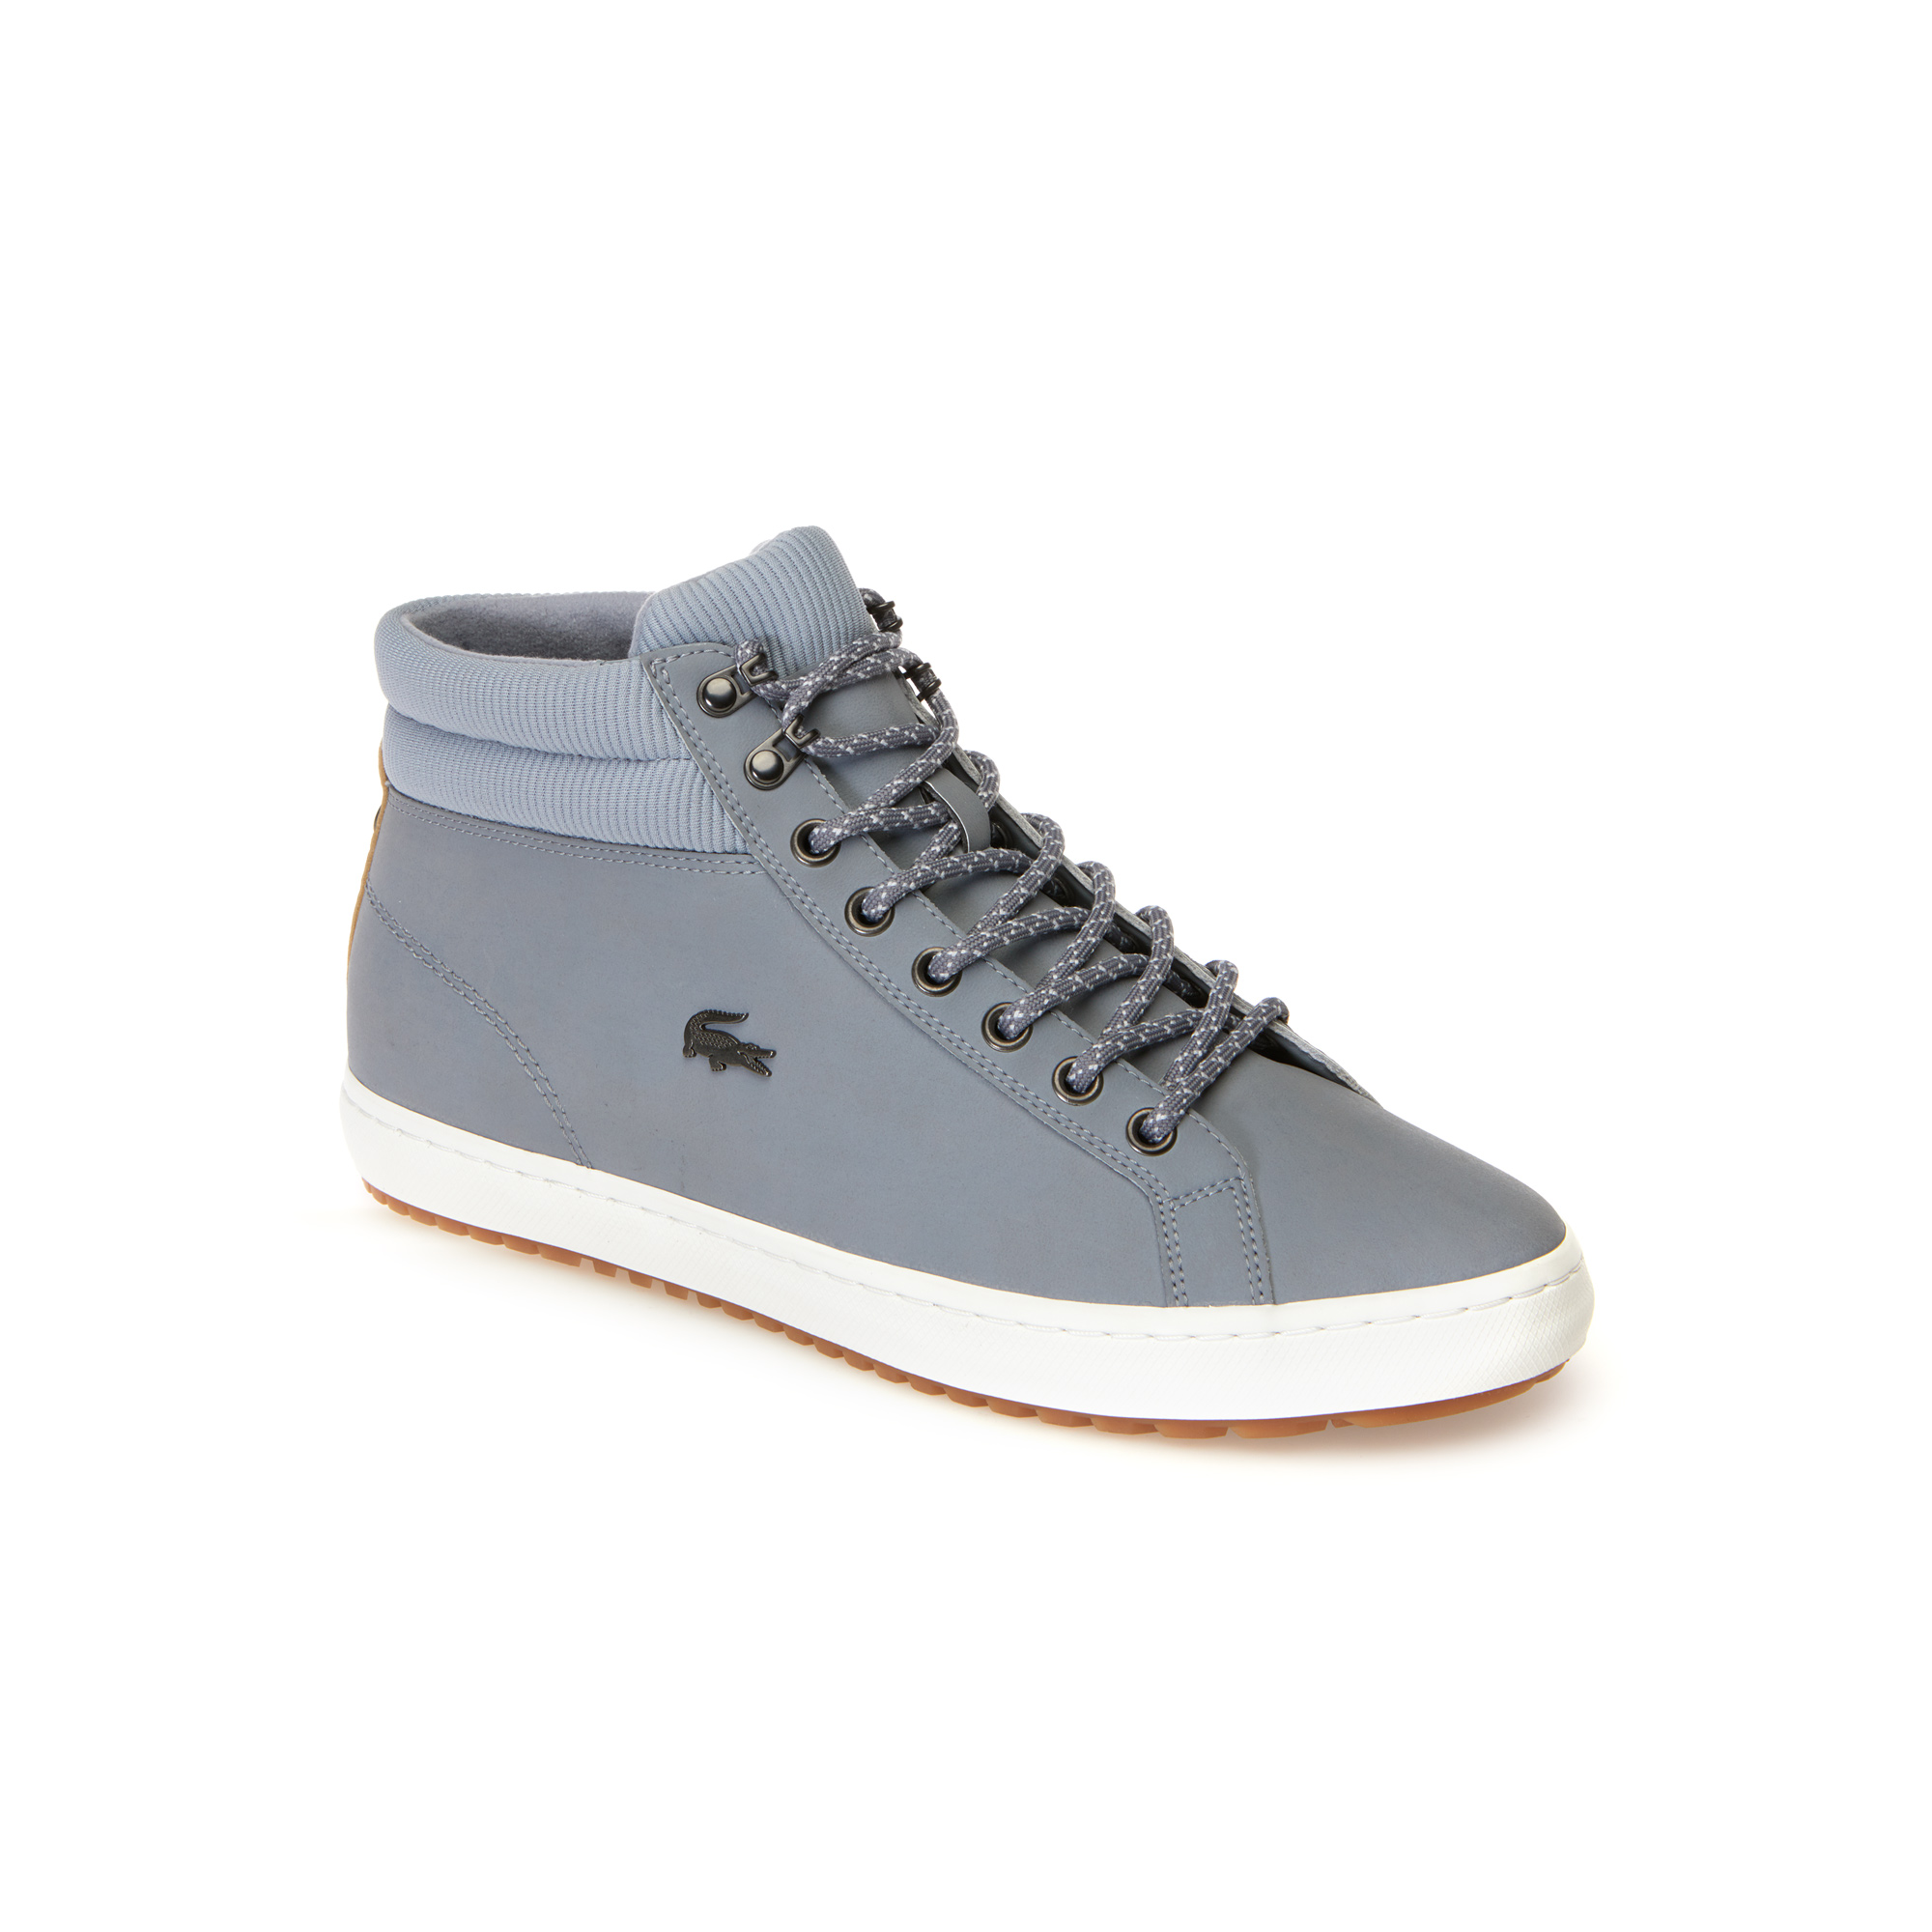 Lacoste Straightset Insulac 318 1 